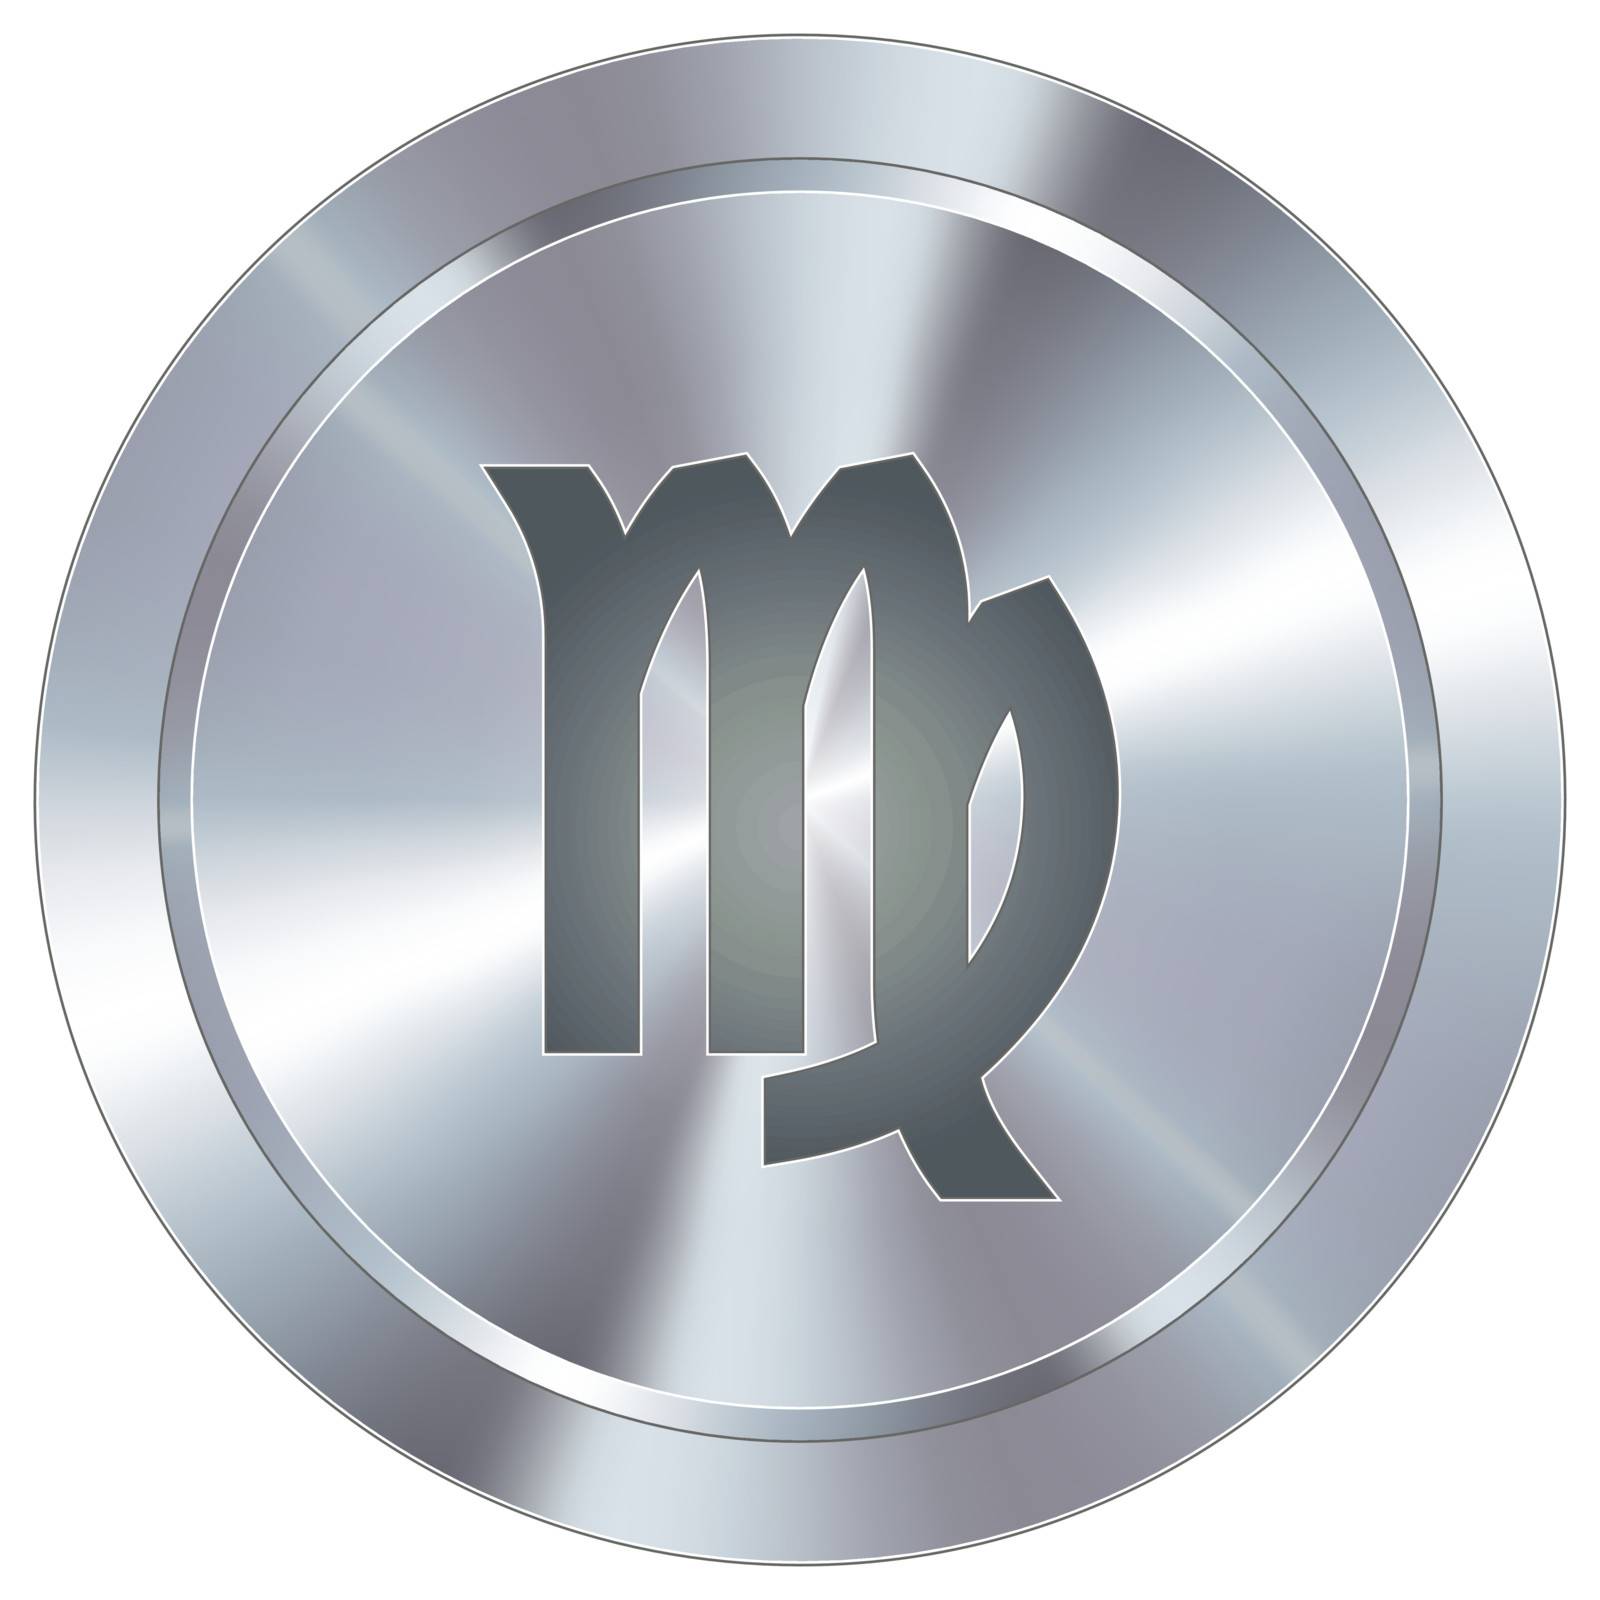 Virgo horoscope sign icon on round stainless steel modern industrial button